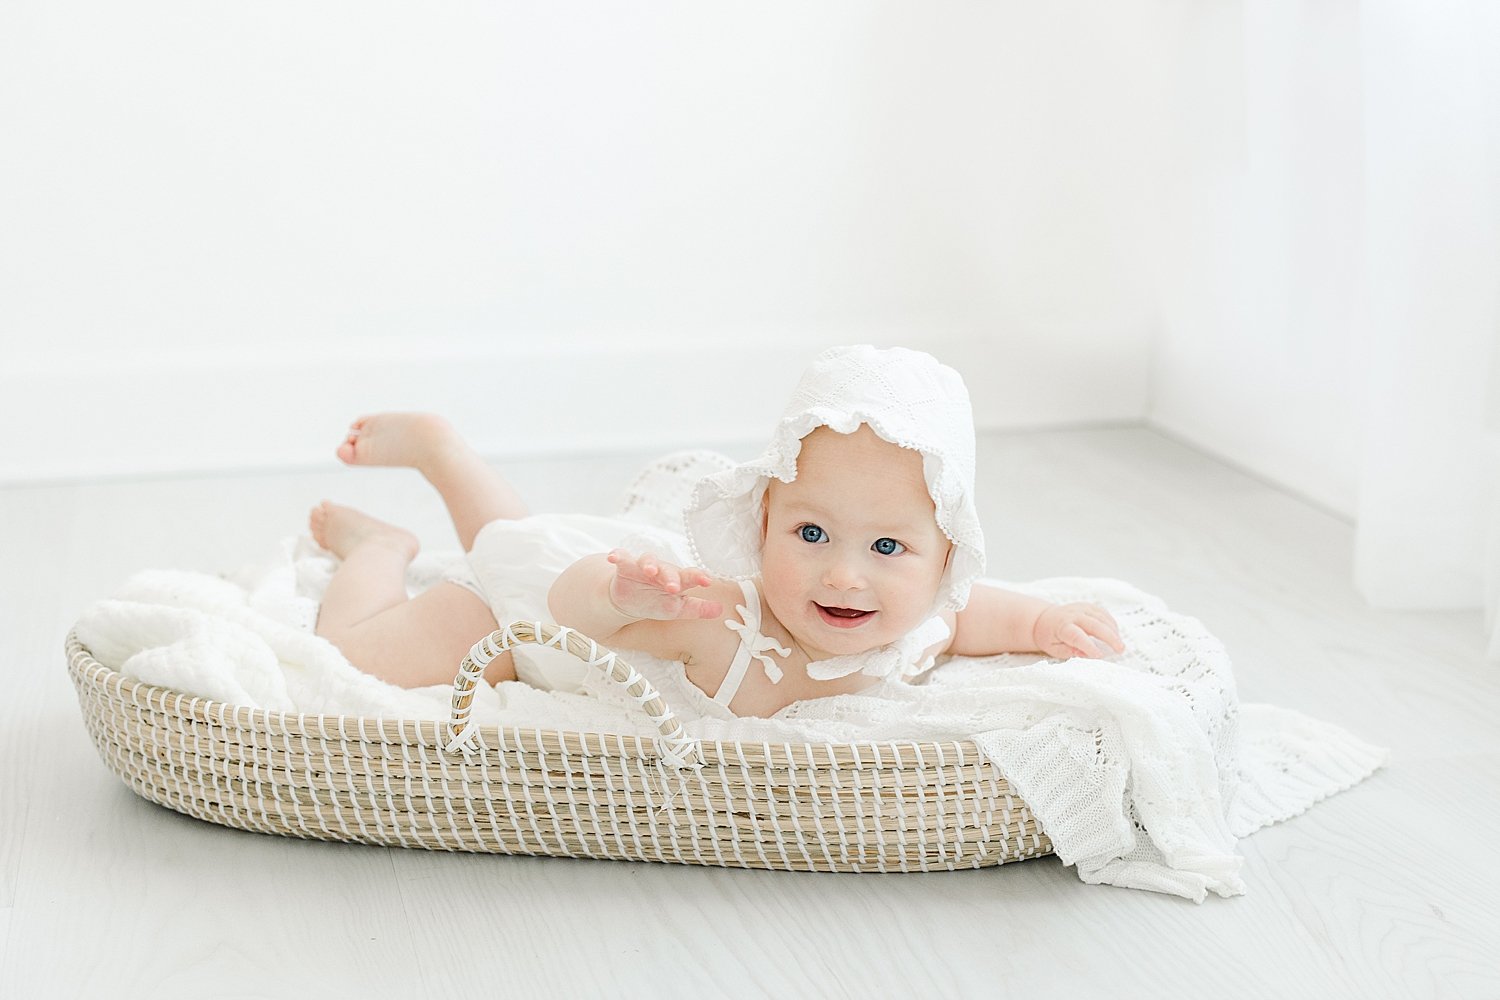 8 month old baby girl wearing a white bonnet, sitting in a Moses basket | Kristin Wood Photography